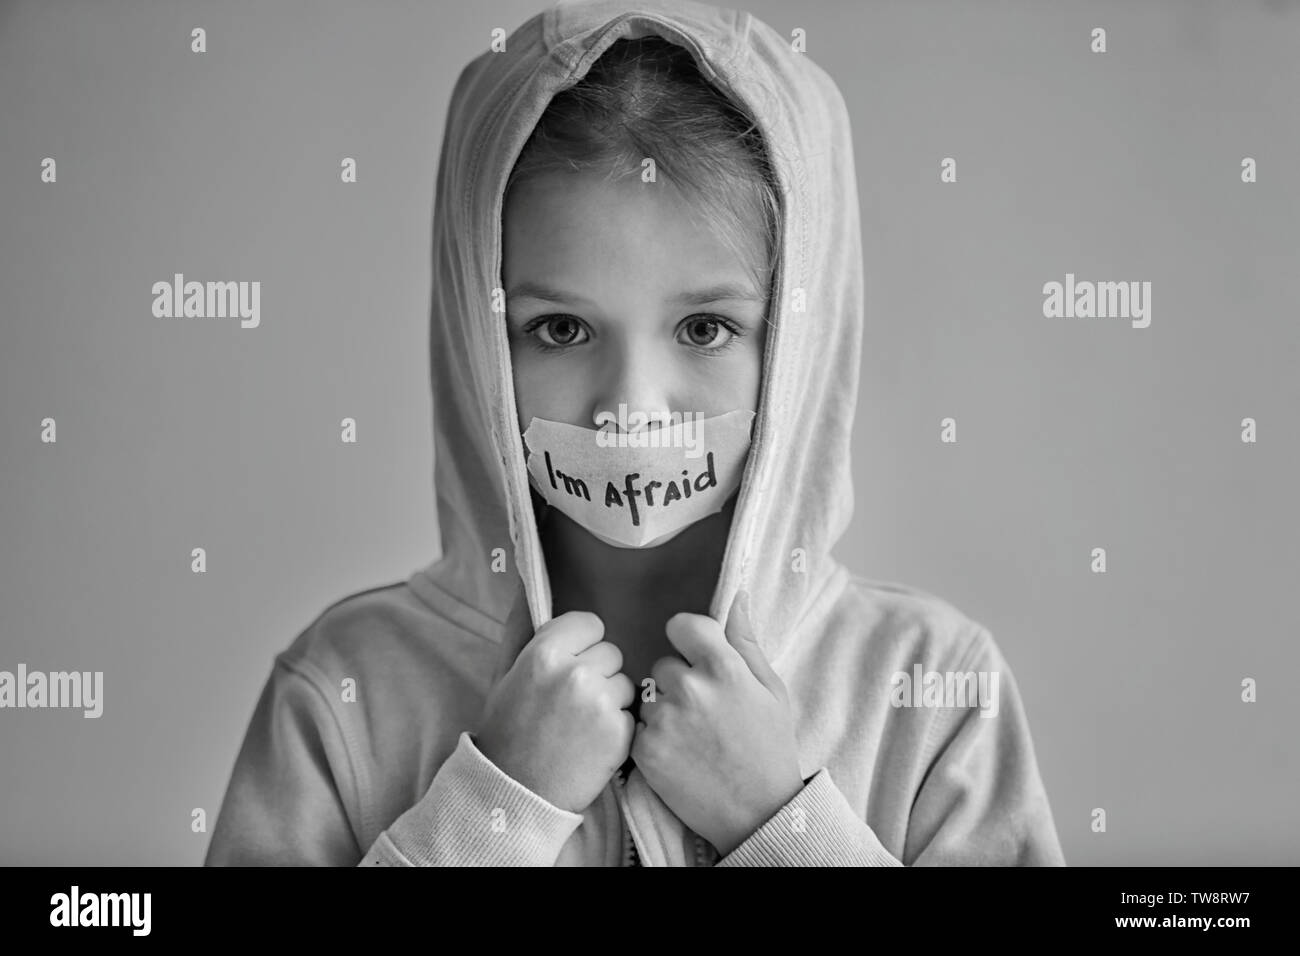 Sad little girl with taped mouth and words 